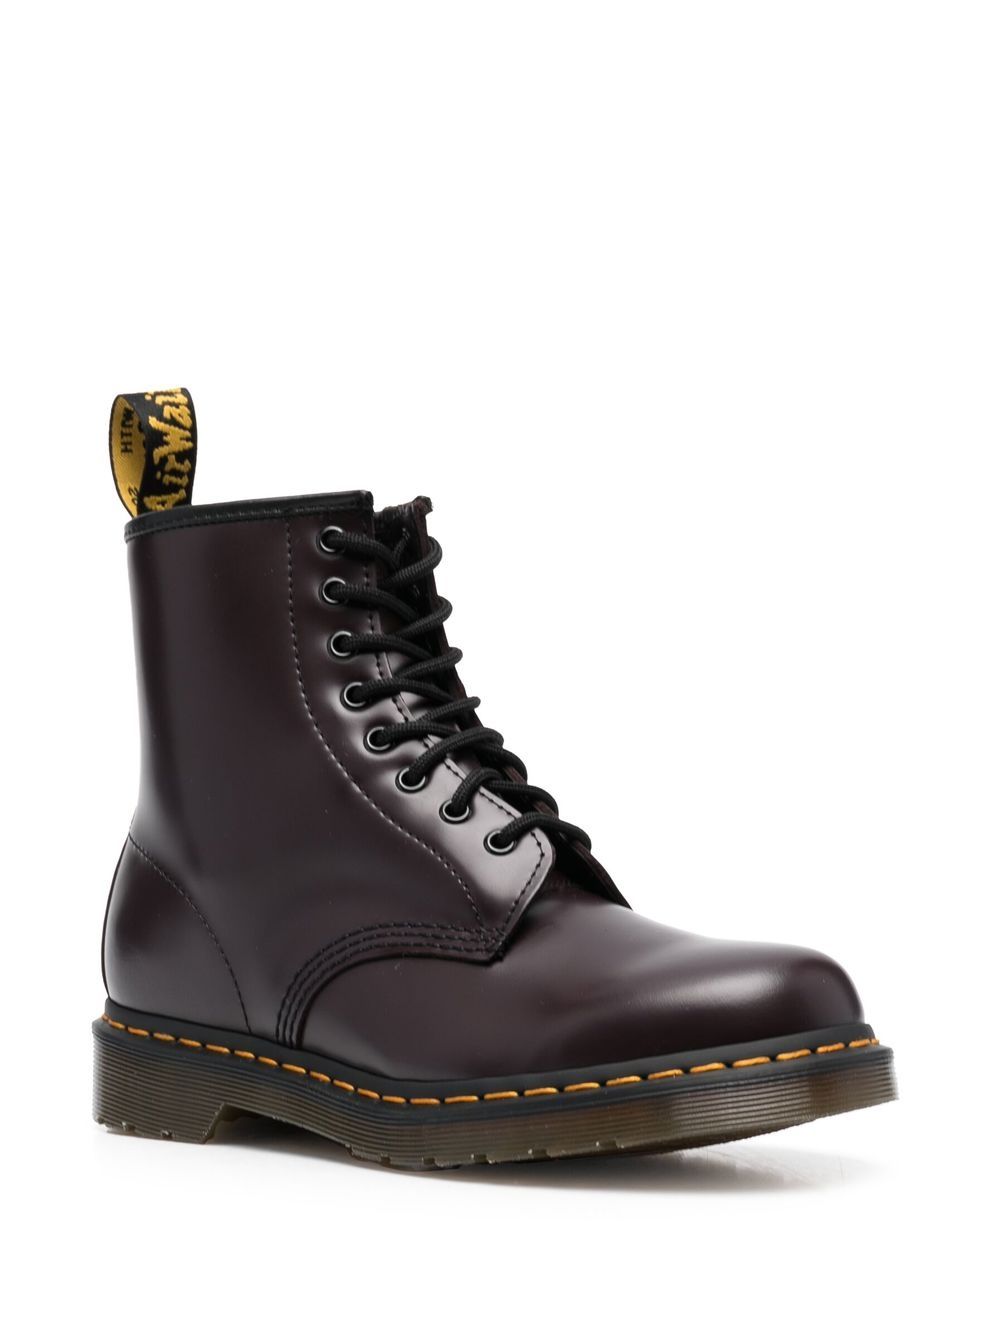 Image 2 of Dr. Martens 1460 lace-up leather boots